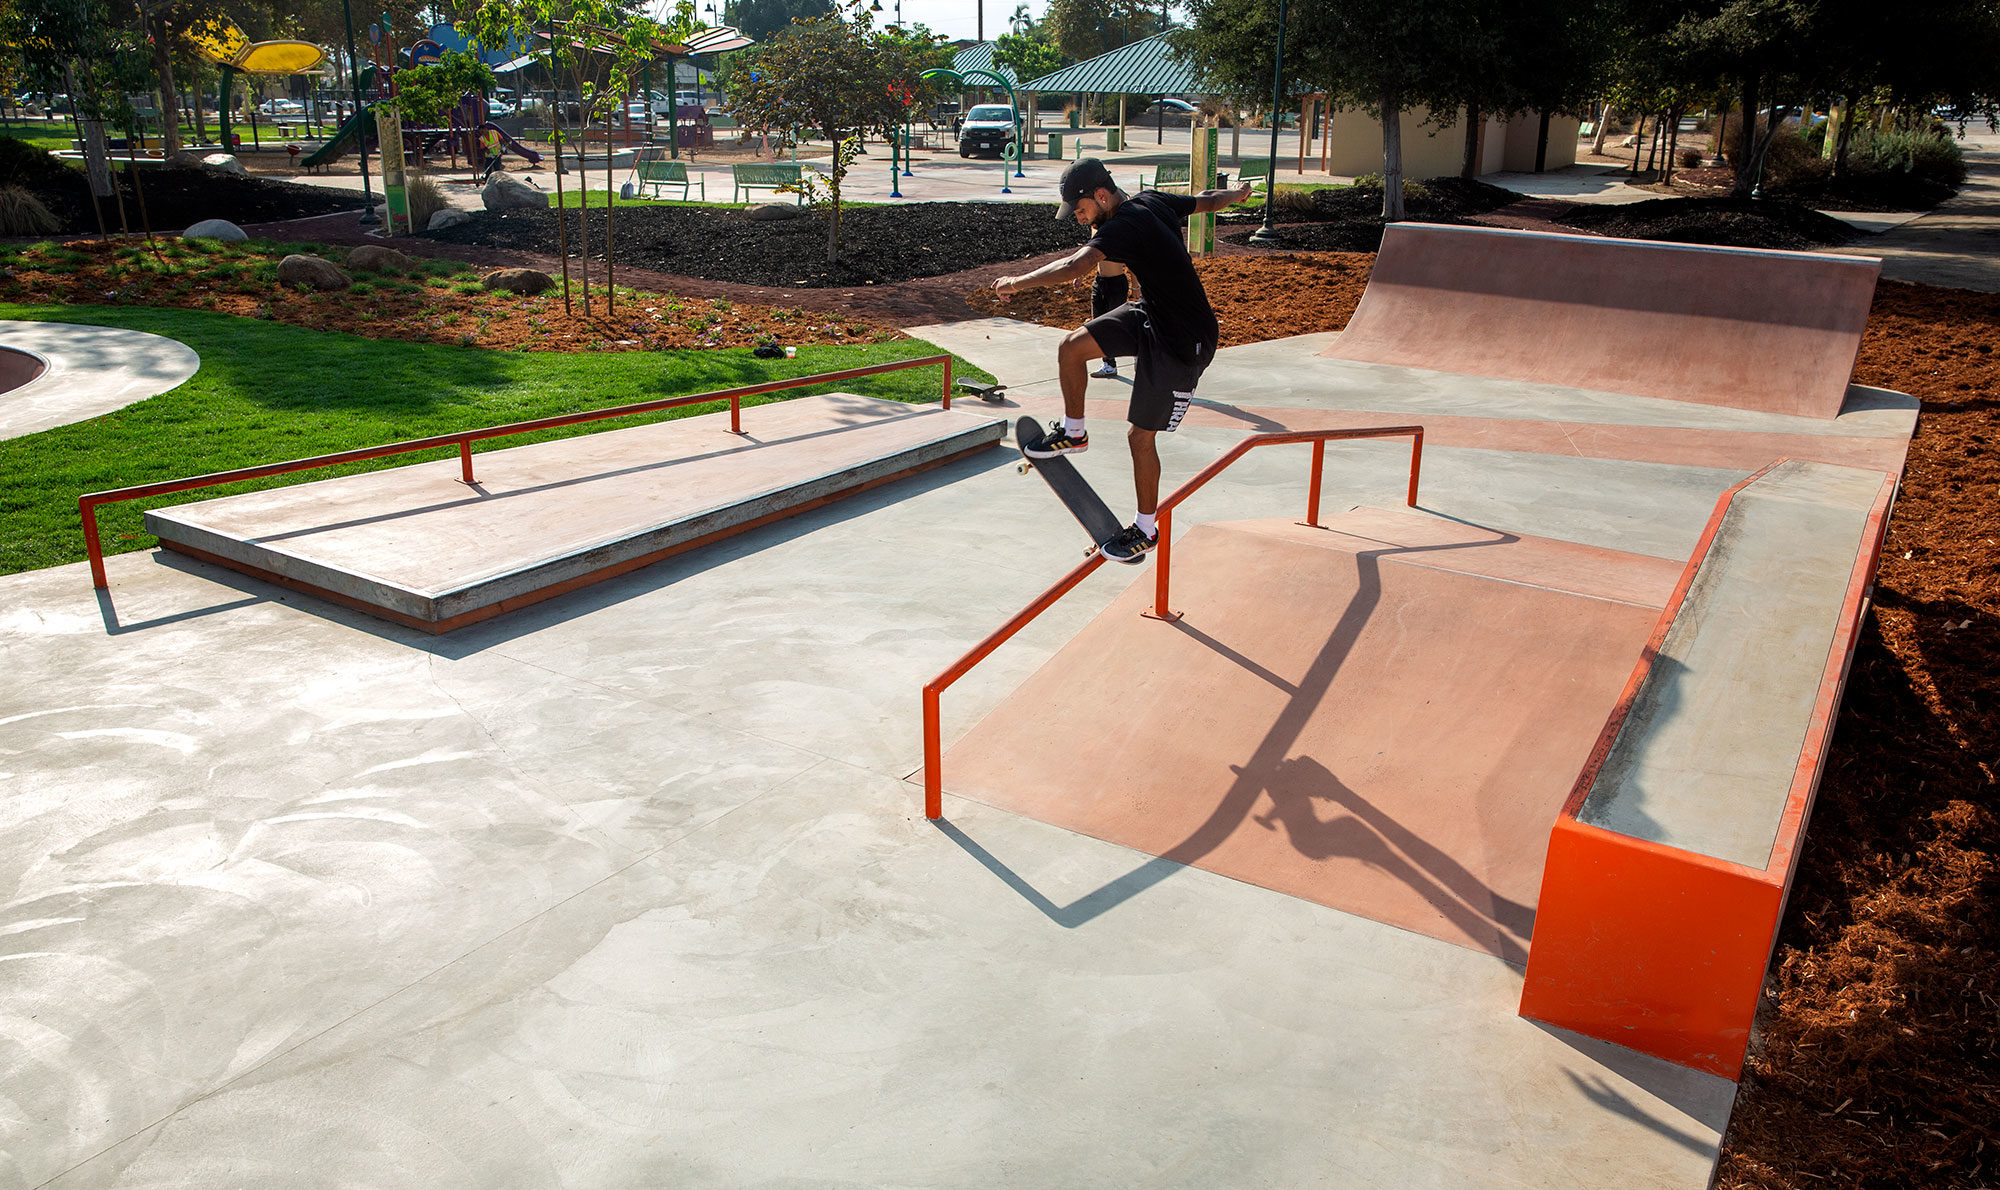 Noseblunt on the A-Frame at Gibson Mariposa Skatepark in El Monte, CA of Skateboard Professional Maurio McCoy